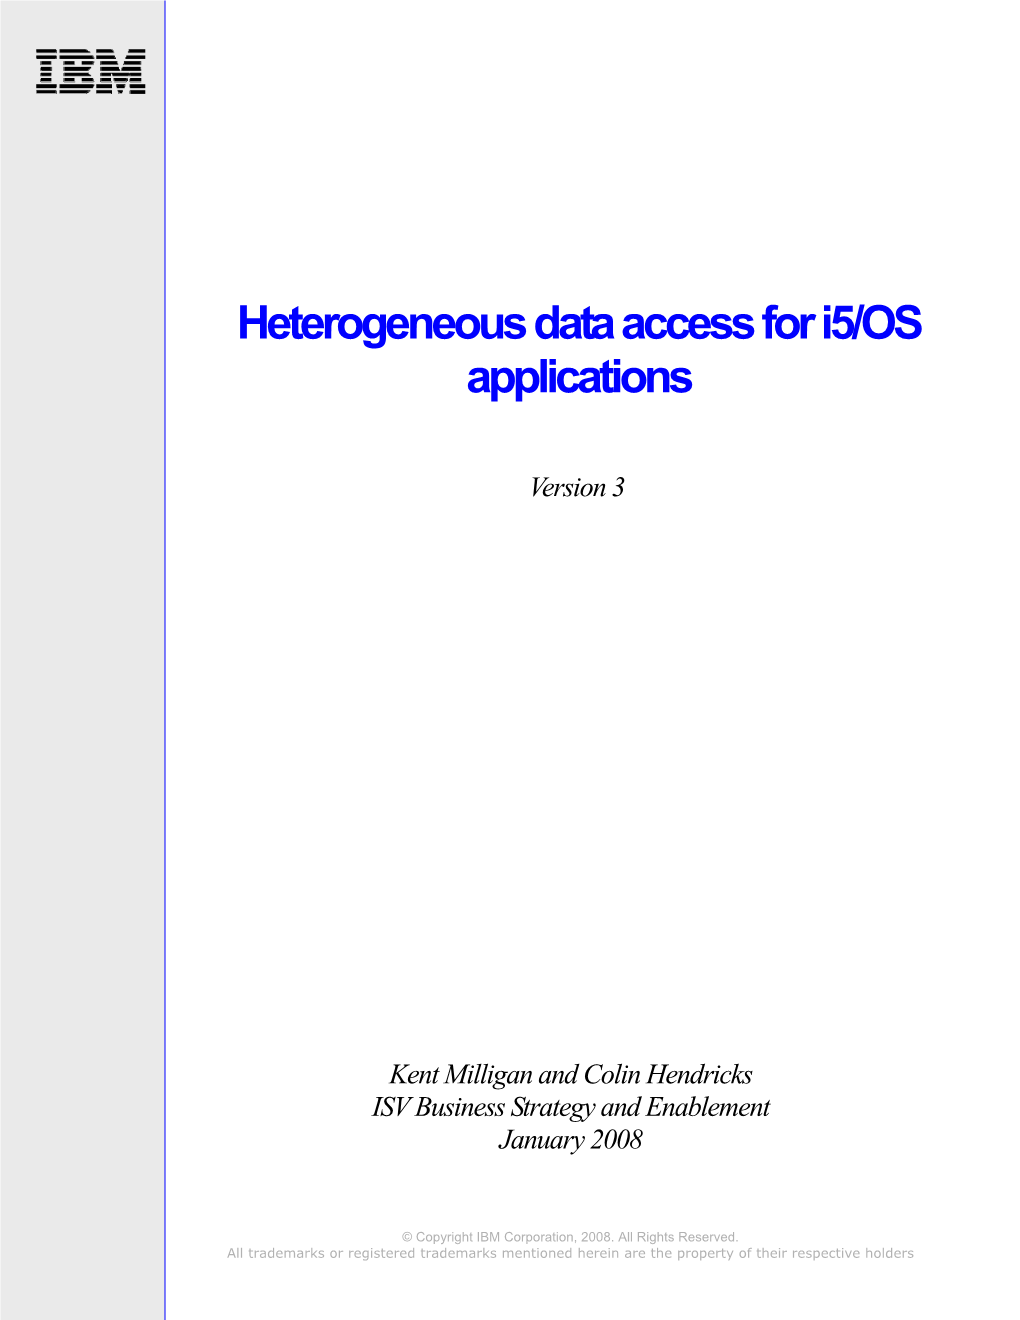 Heterogeneous Data Access for I5/OS Applications